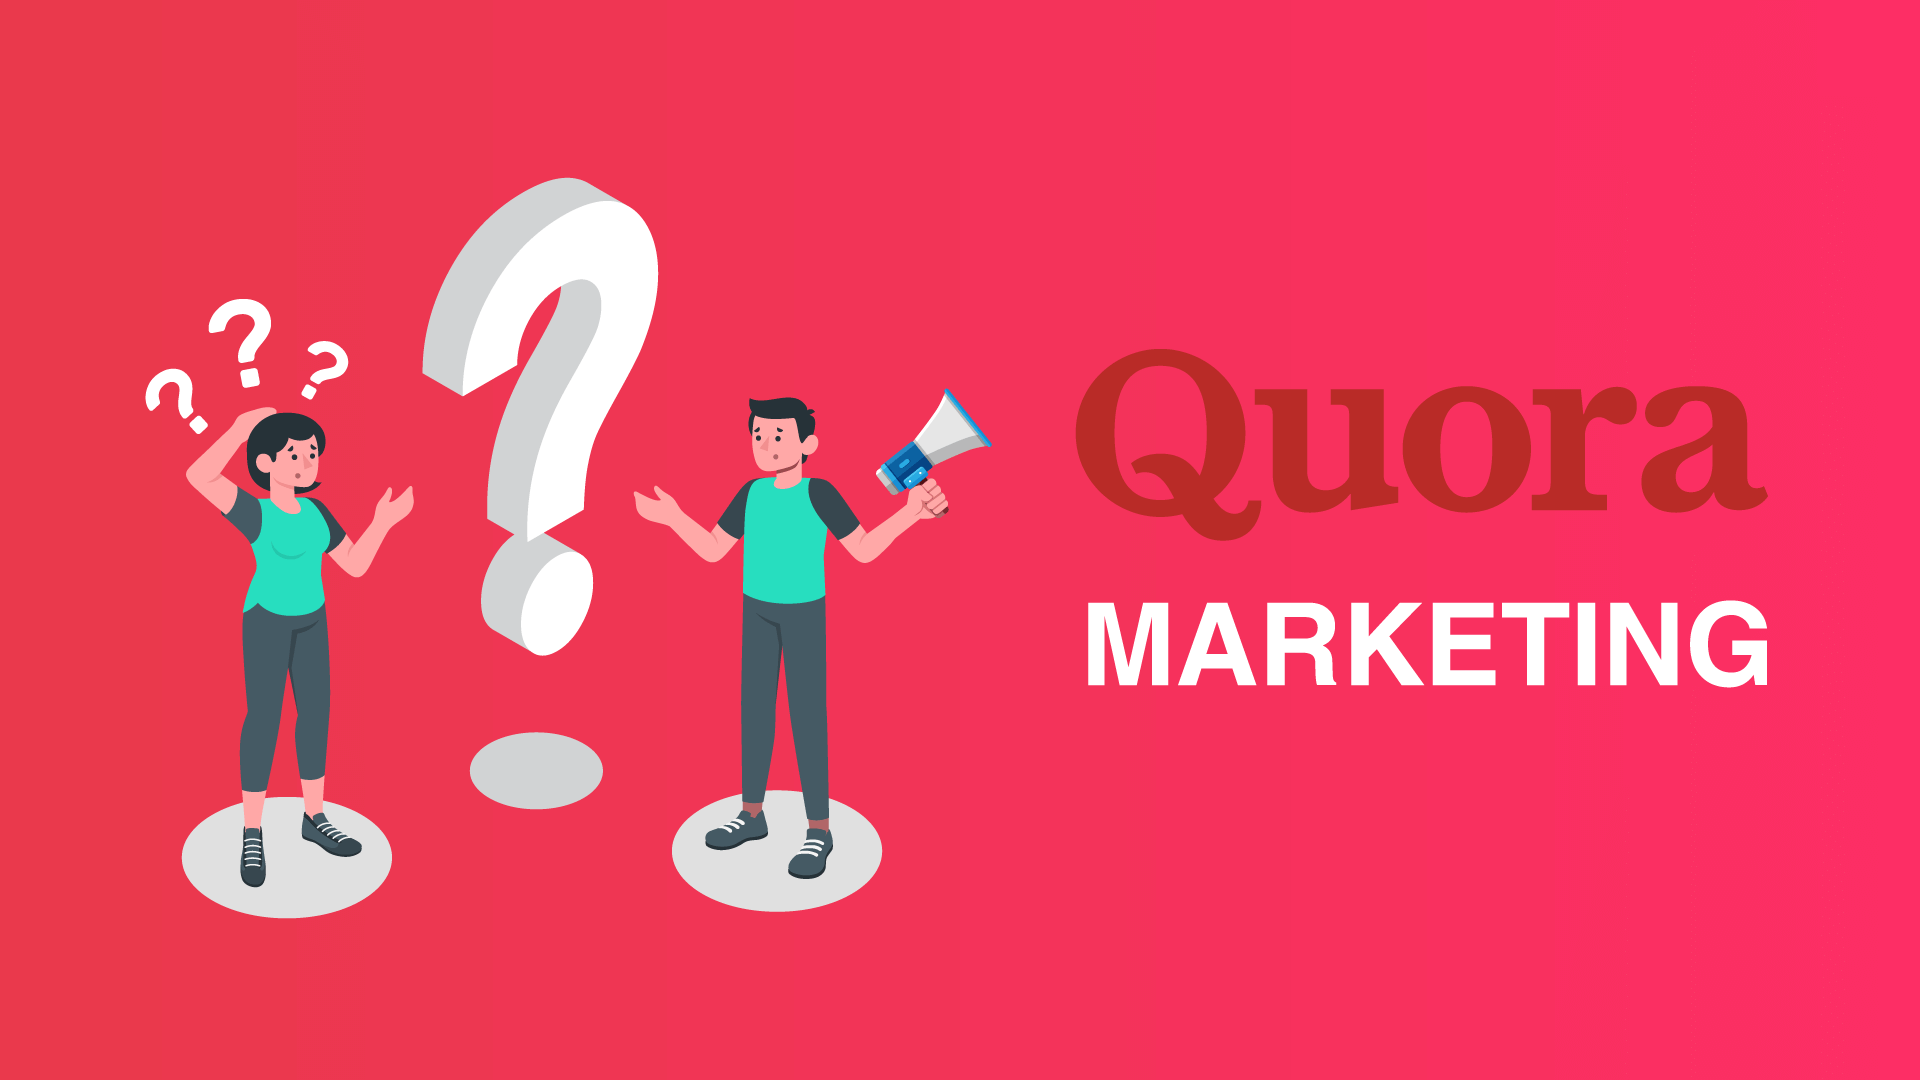 Quora Marketing: The Complete Guide To Marketing Your Business On Quora